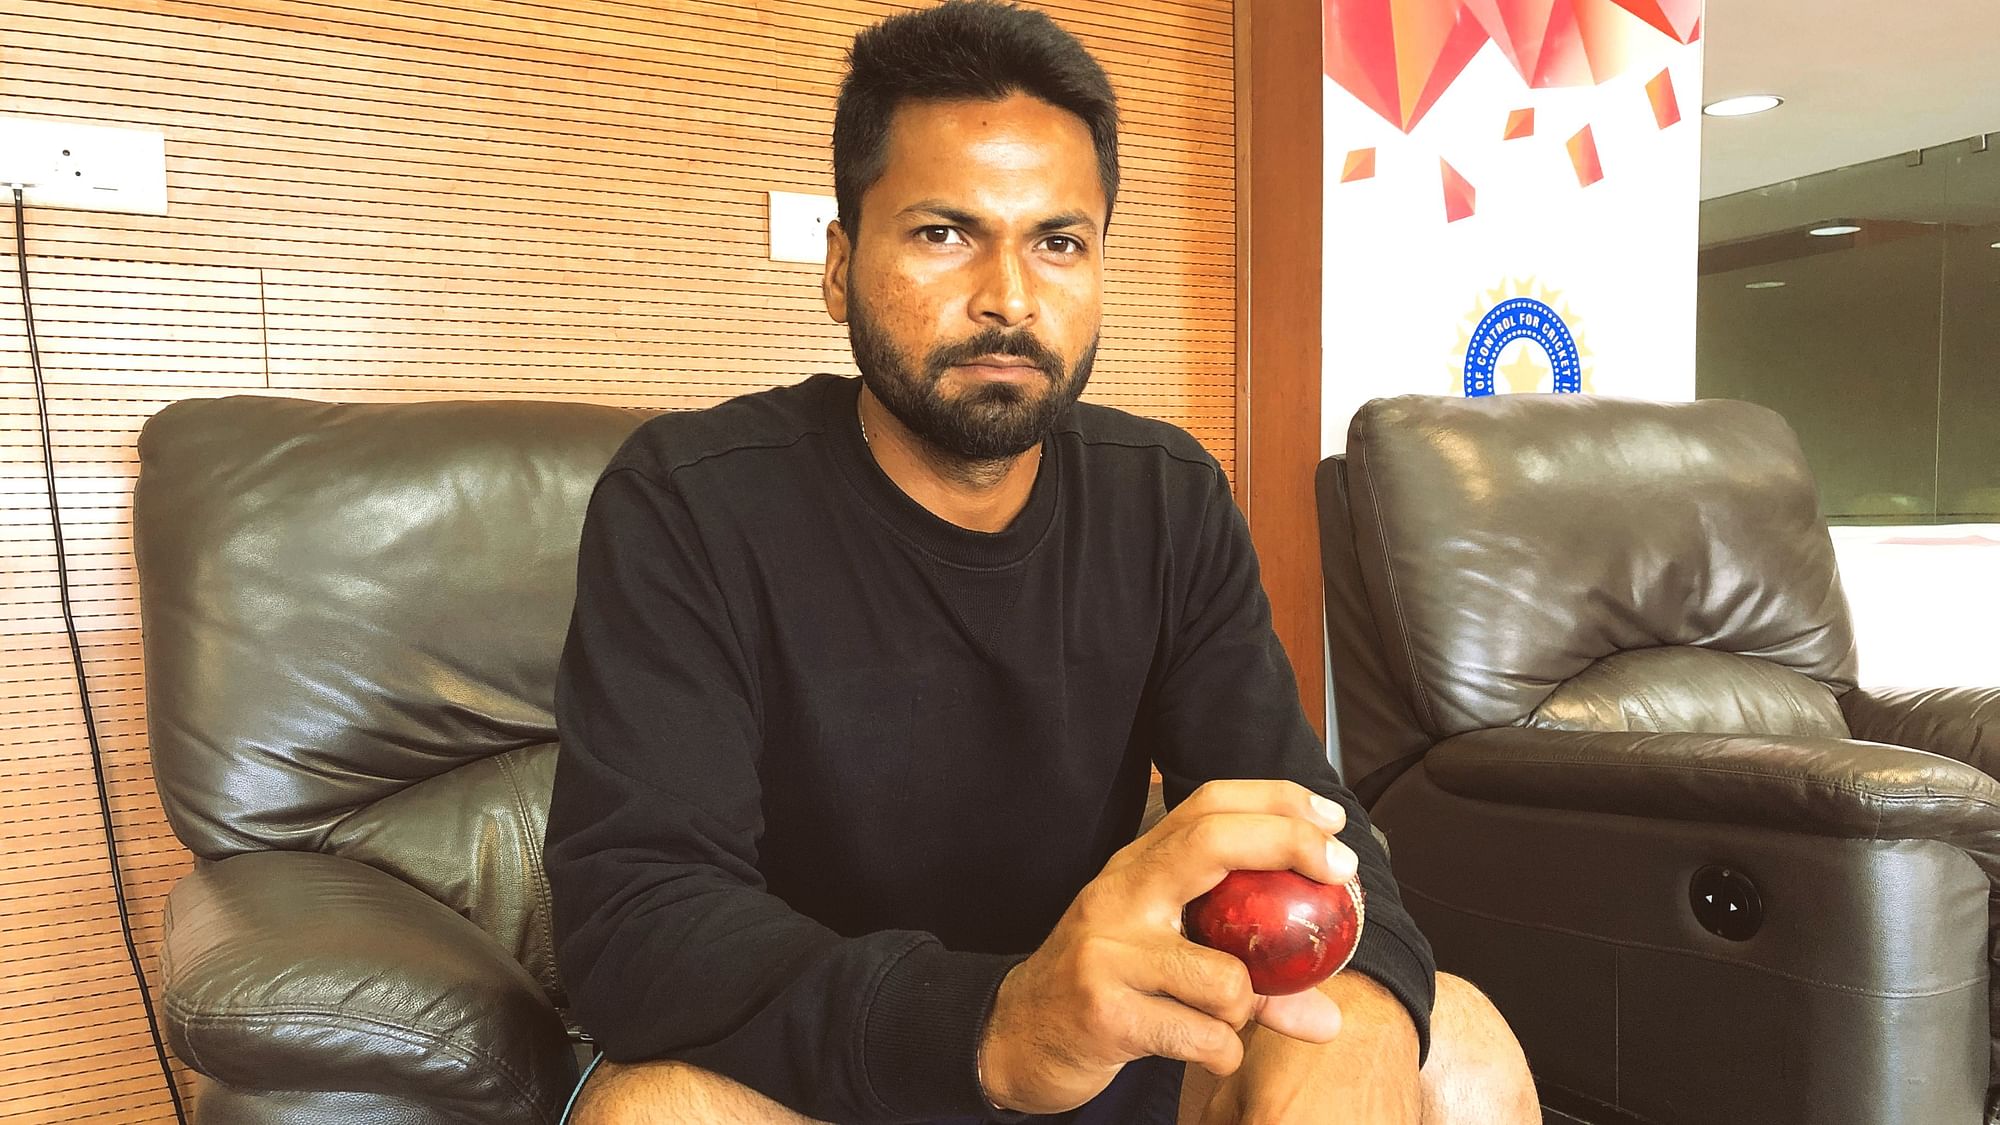 Bengal cricketer Mukesh's journey to being a prized bowler for his side has been one wrought with struggles which very few manage to overcome.